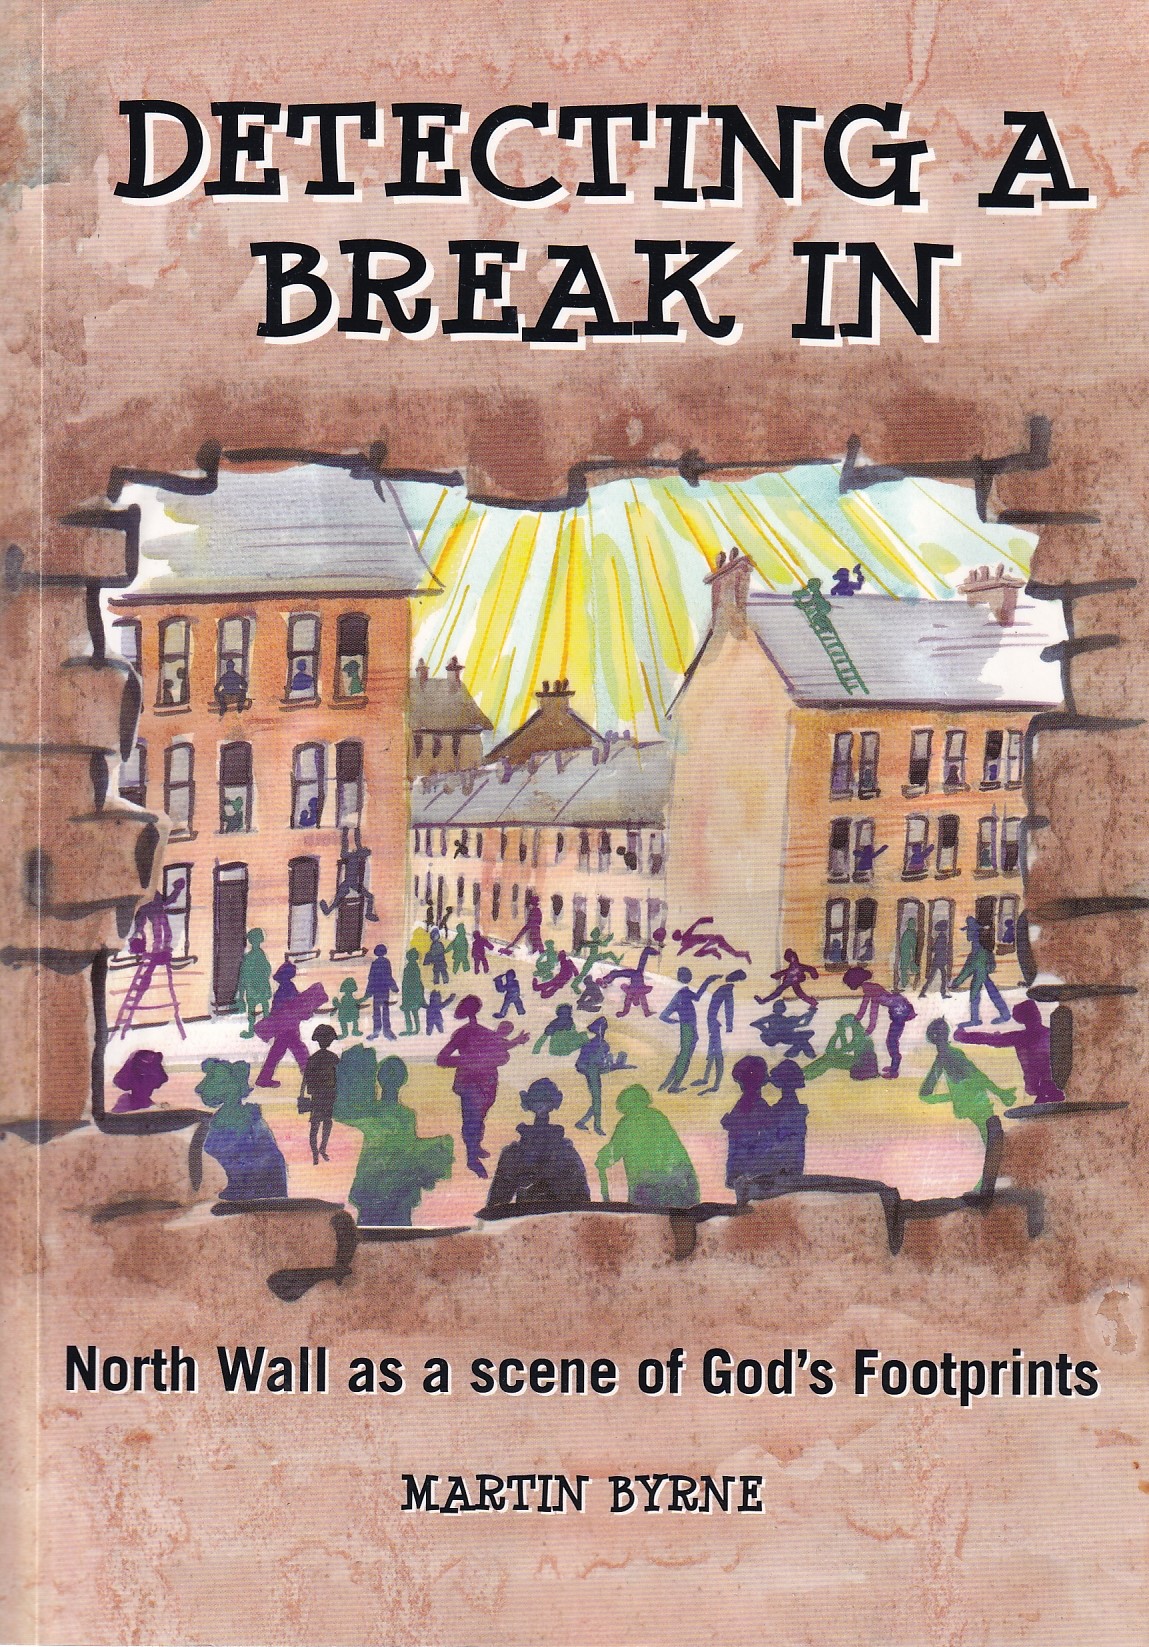 Detecting A Break In: North Wall as a scene of God’s Footprints by Martin Byrne